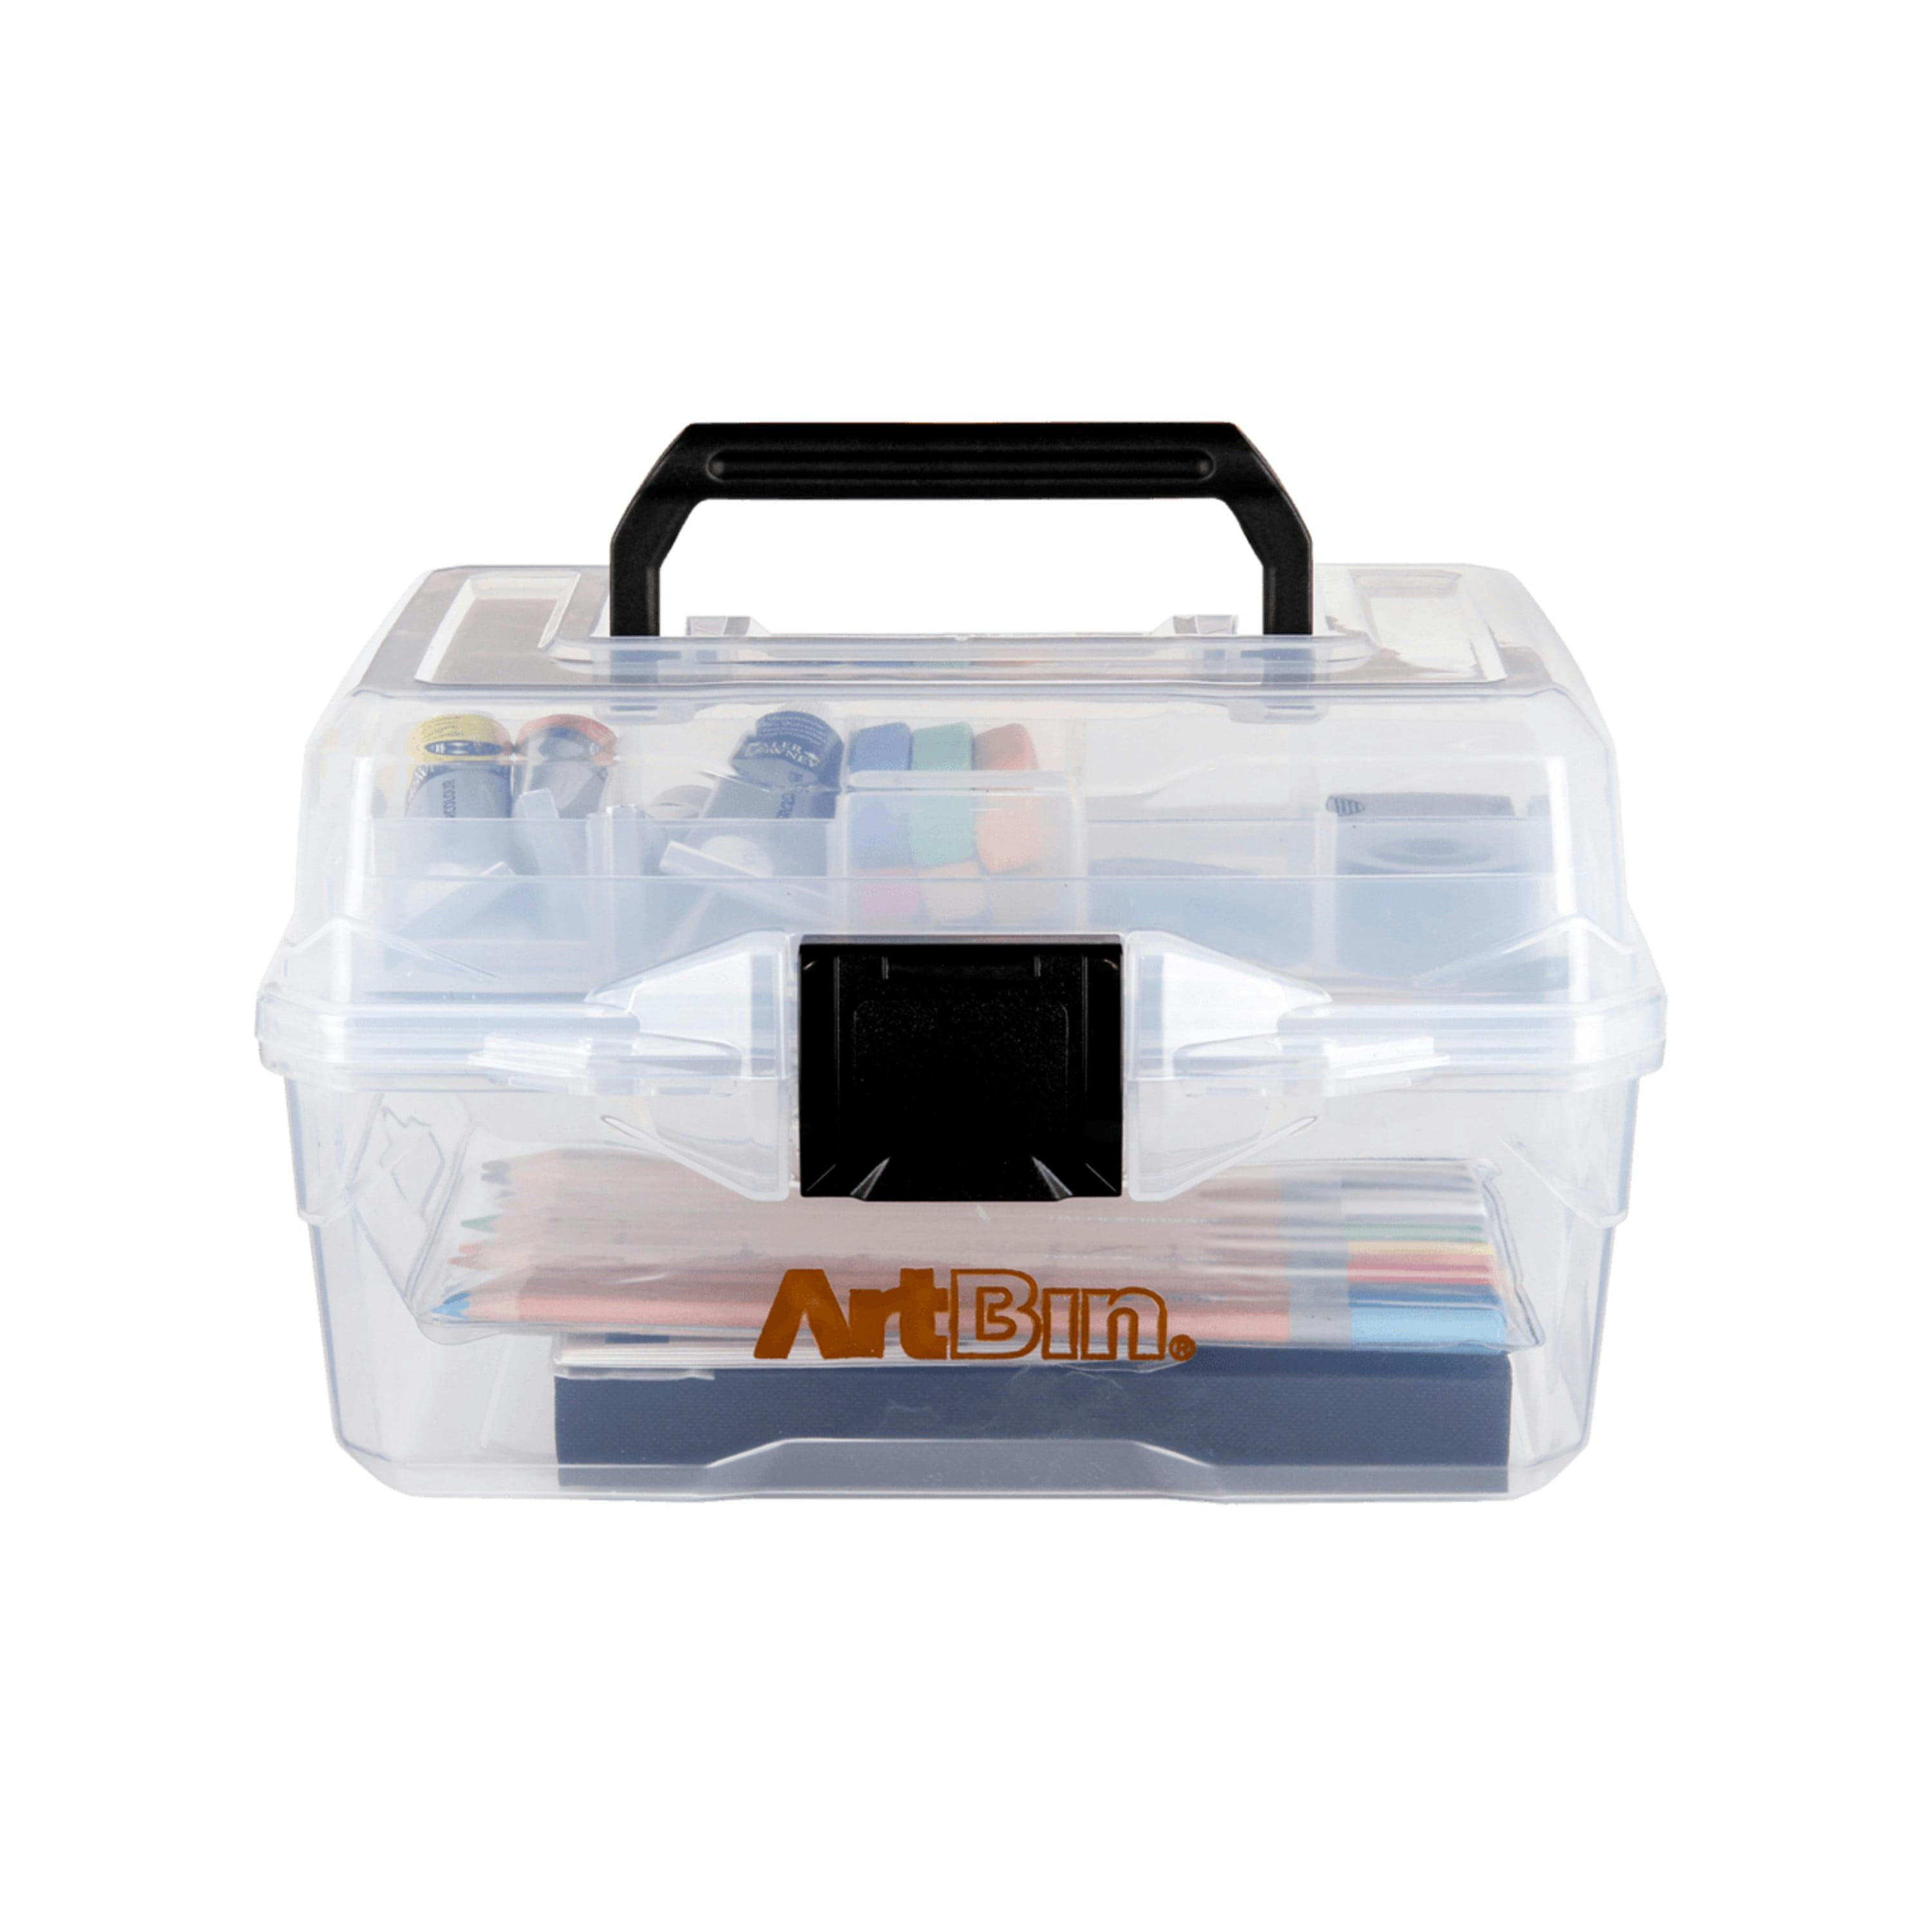 Crystal Clear Rectangular Plastic ArtBin for Kids with Latch